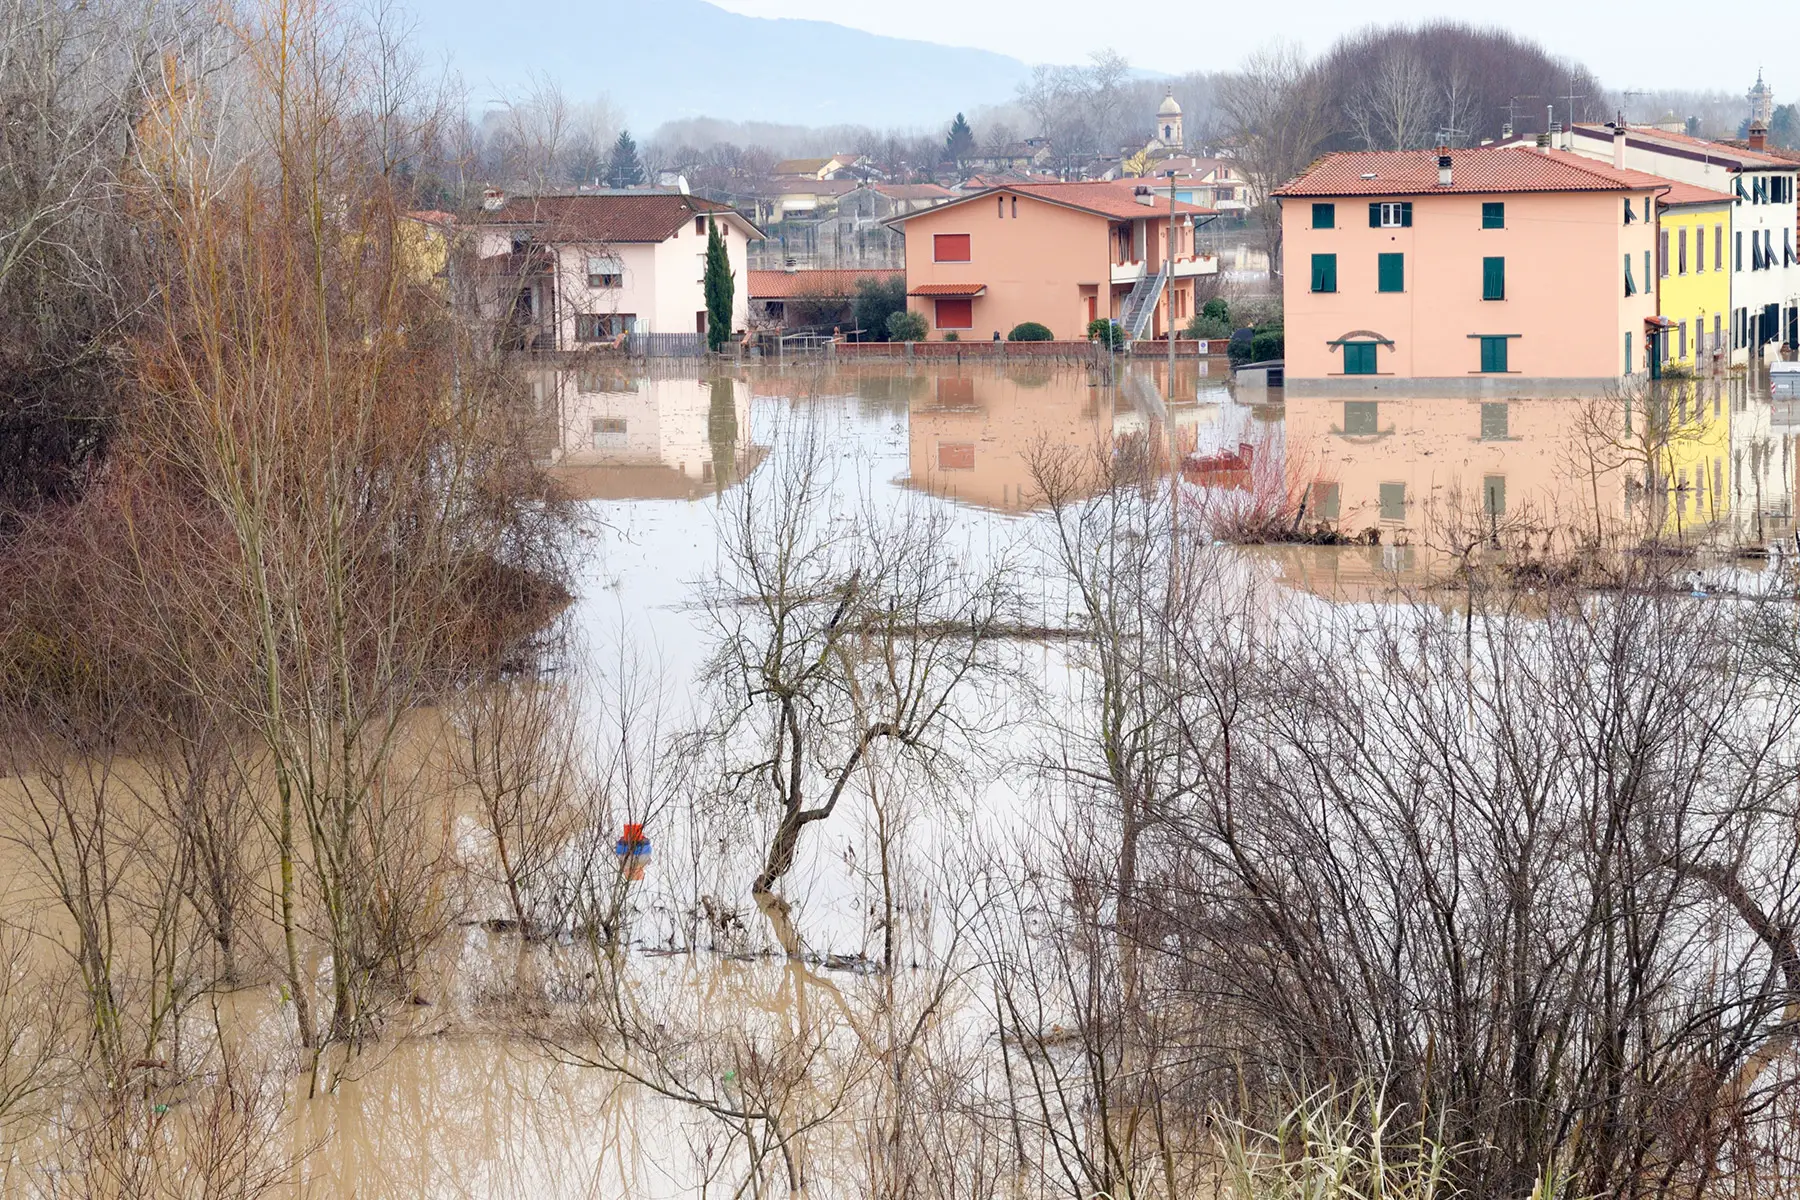 A large area of flooded land with buildings in the background that have water up to the windows